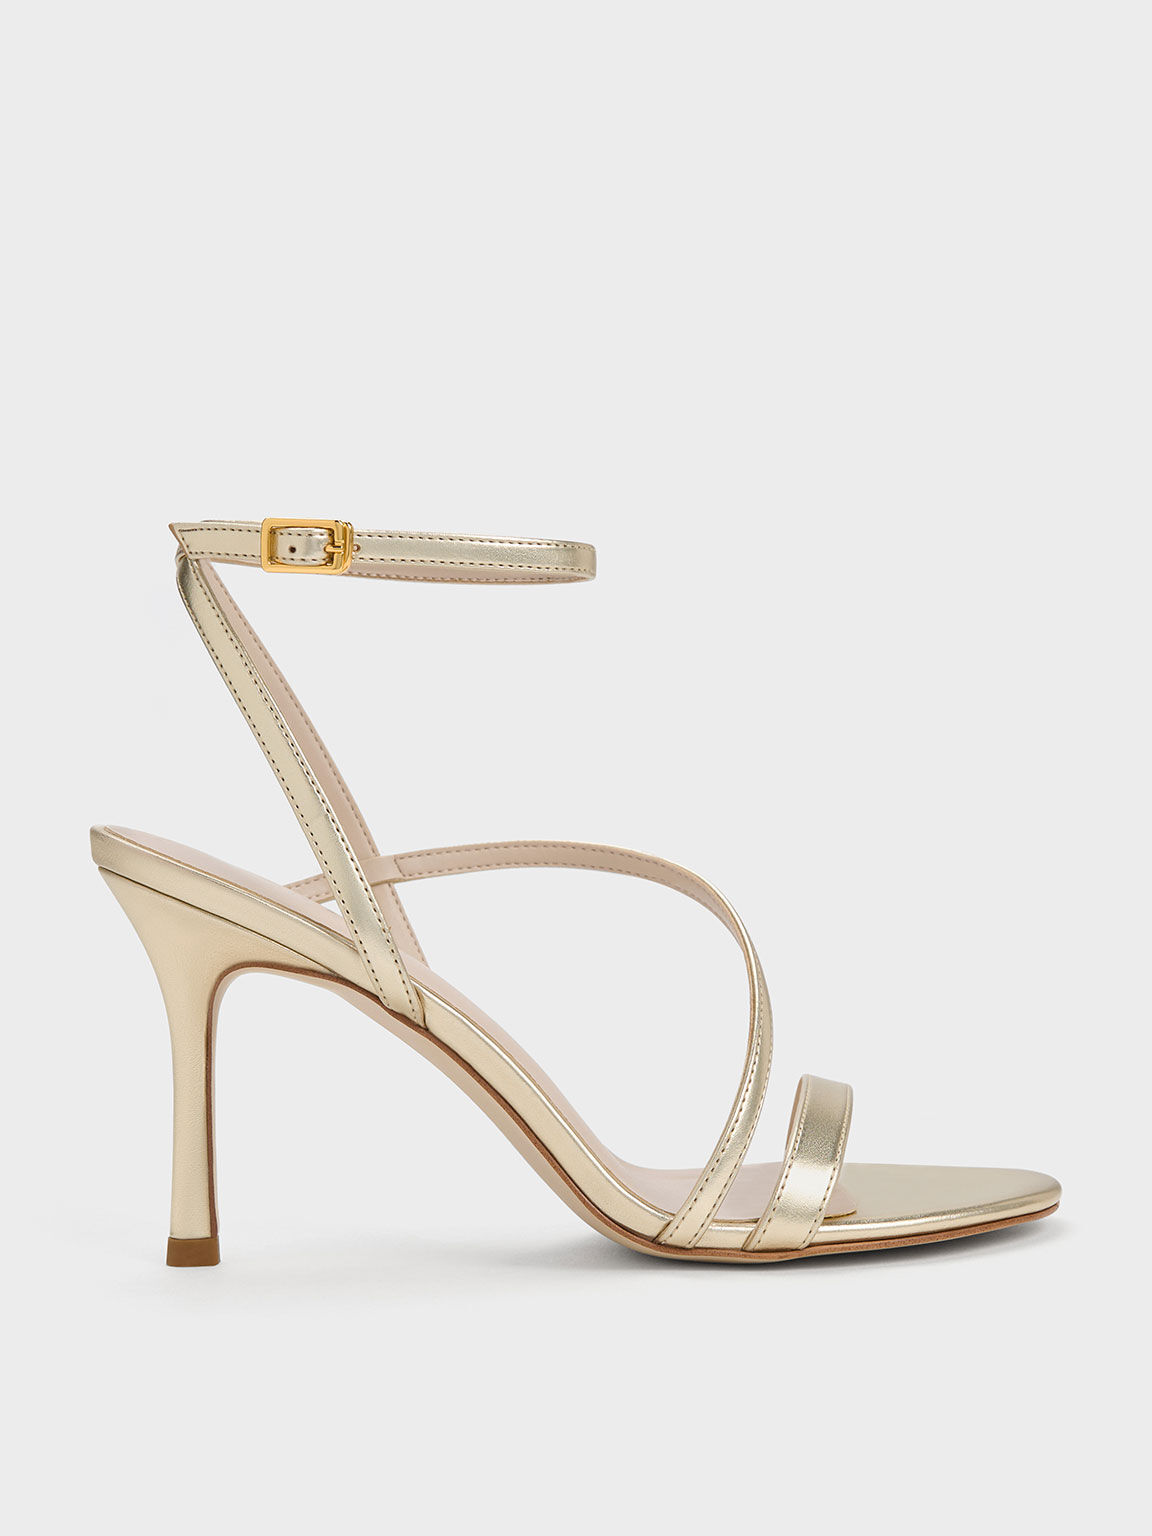 Gold Metallic Asymmetric Strappy Heeled Sandals - CHARLES & KEITH US